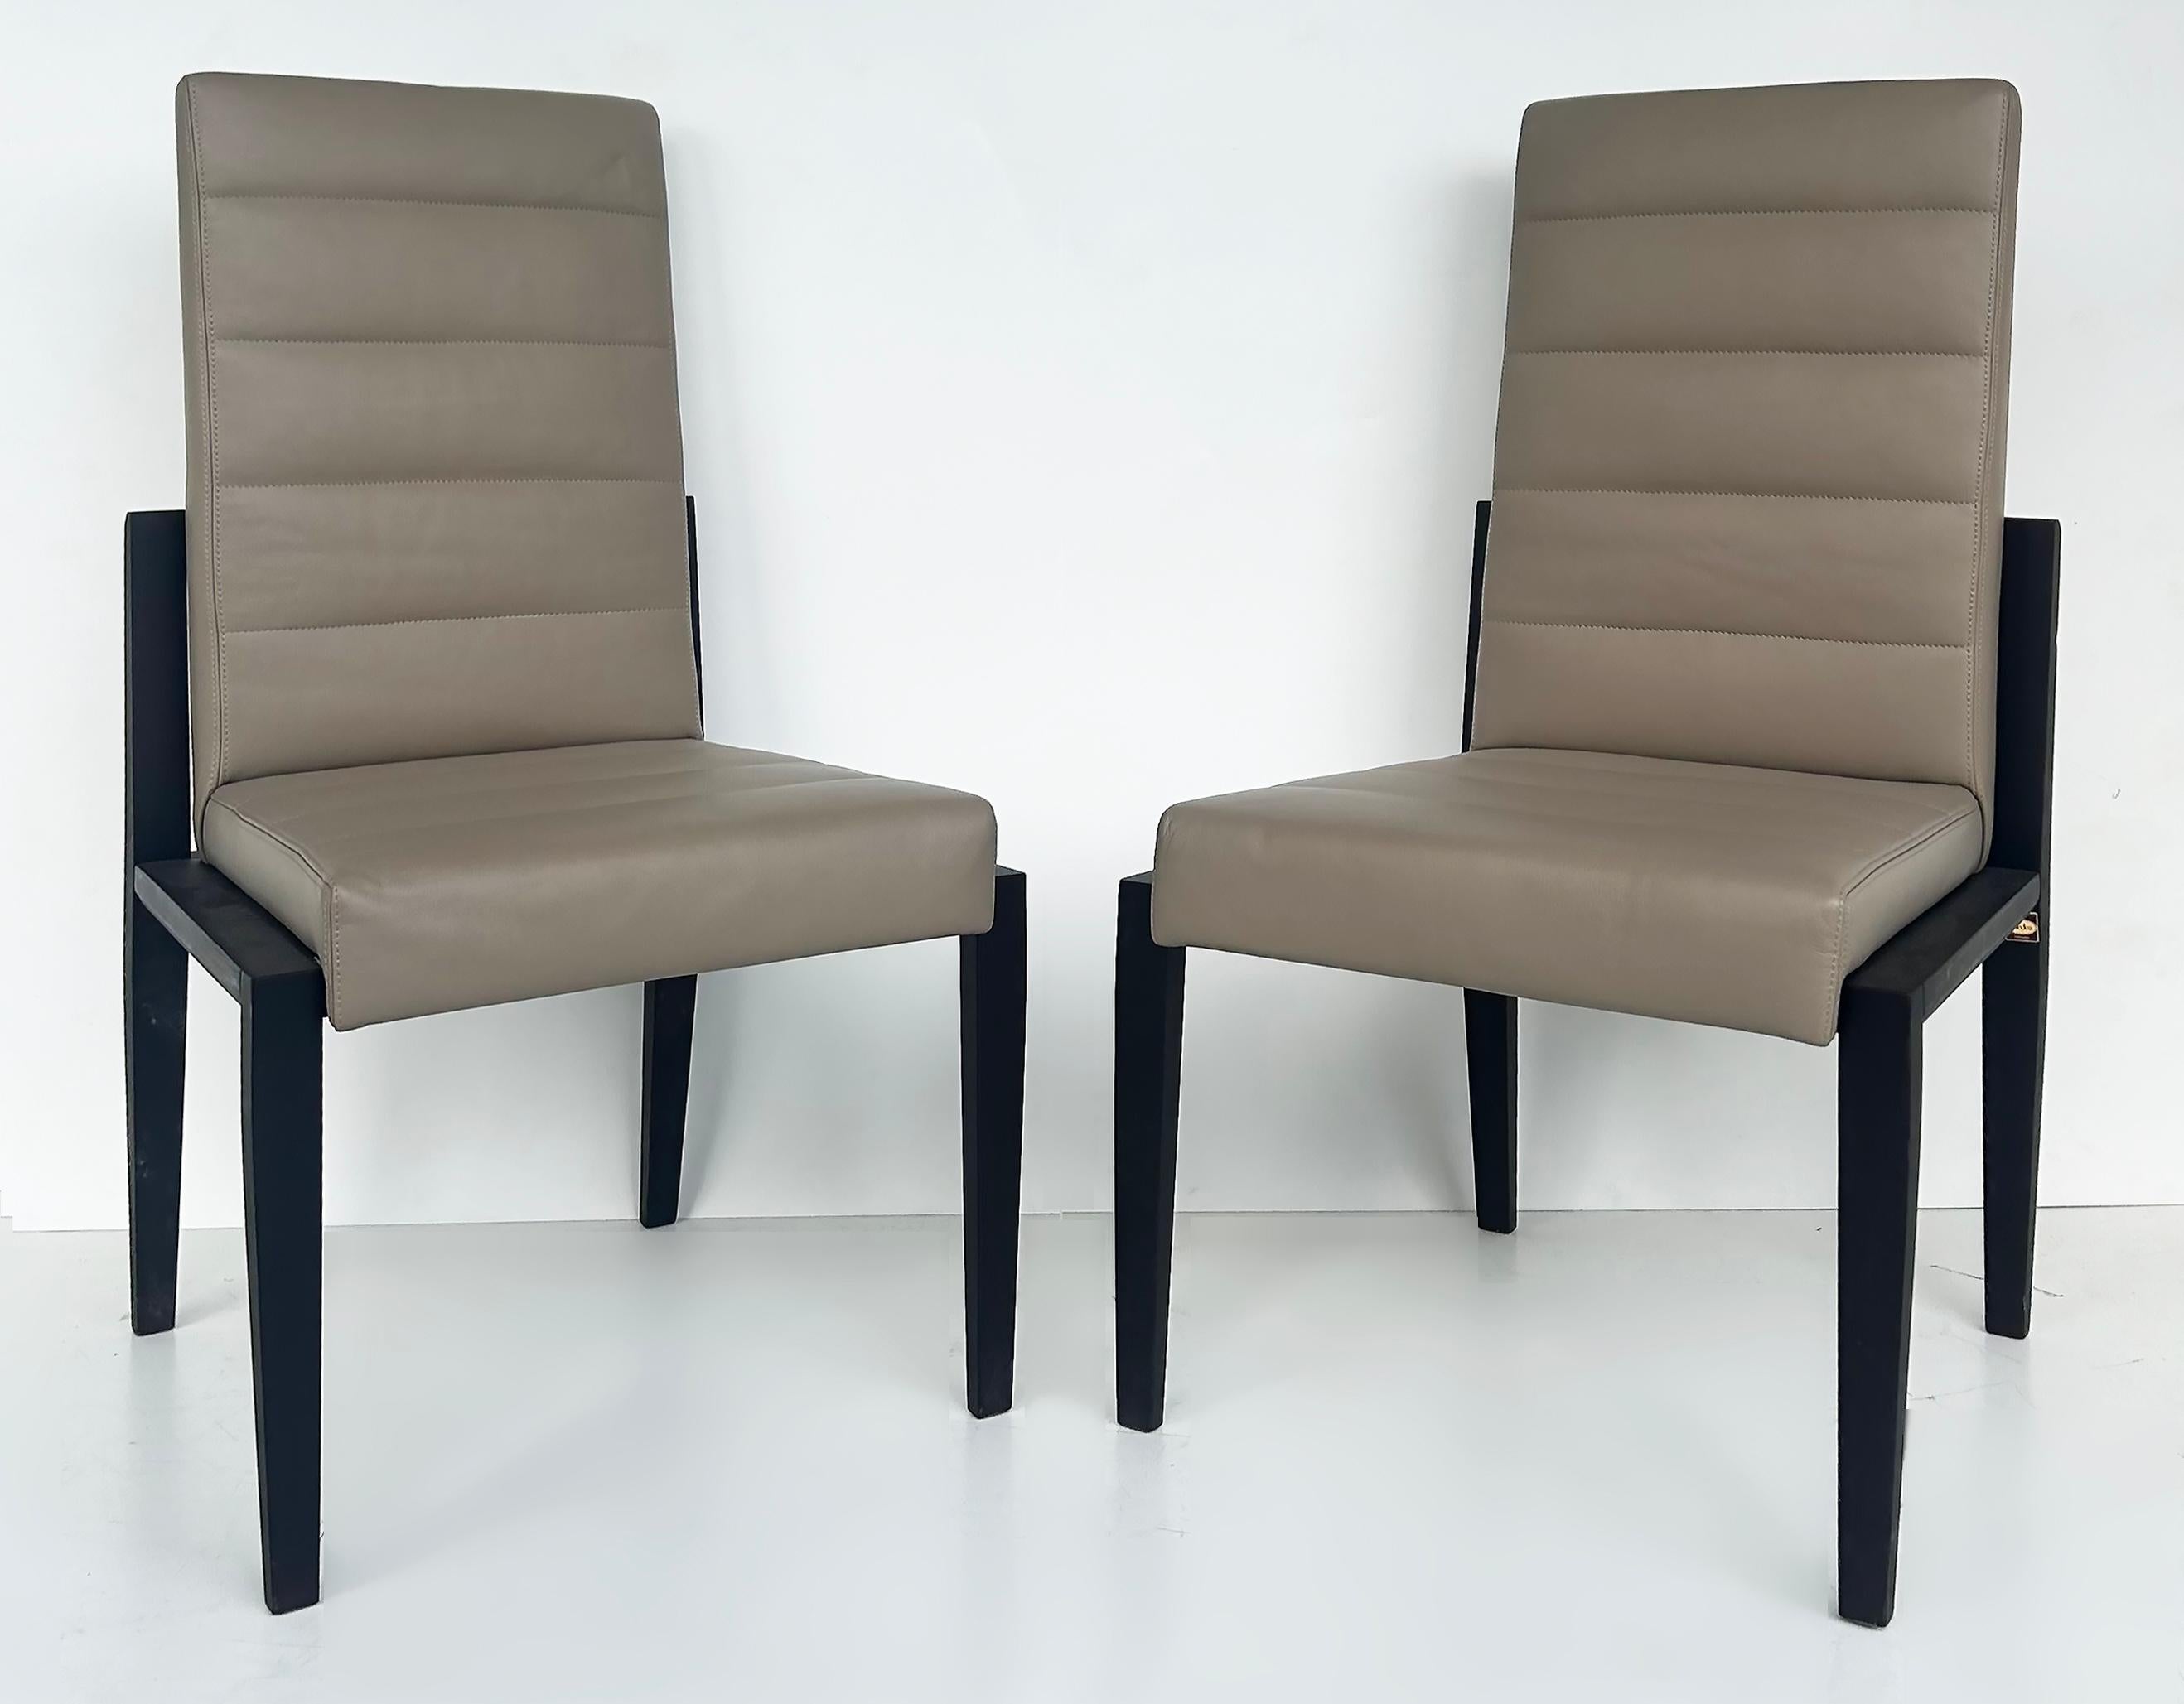 Umberto Asnago for Mobilidea Italian Leather/Oak Tall Chairs, Pair  

Offered for sale is a wonderful pair of Italian leather and stained mocha or espresso wood oak tall dining chairs manufactured by the Italian fine furniture maker Mobilidea. They